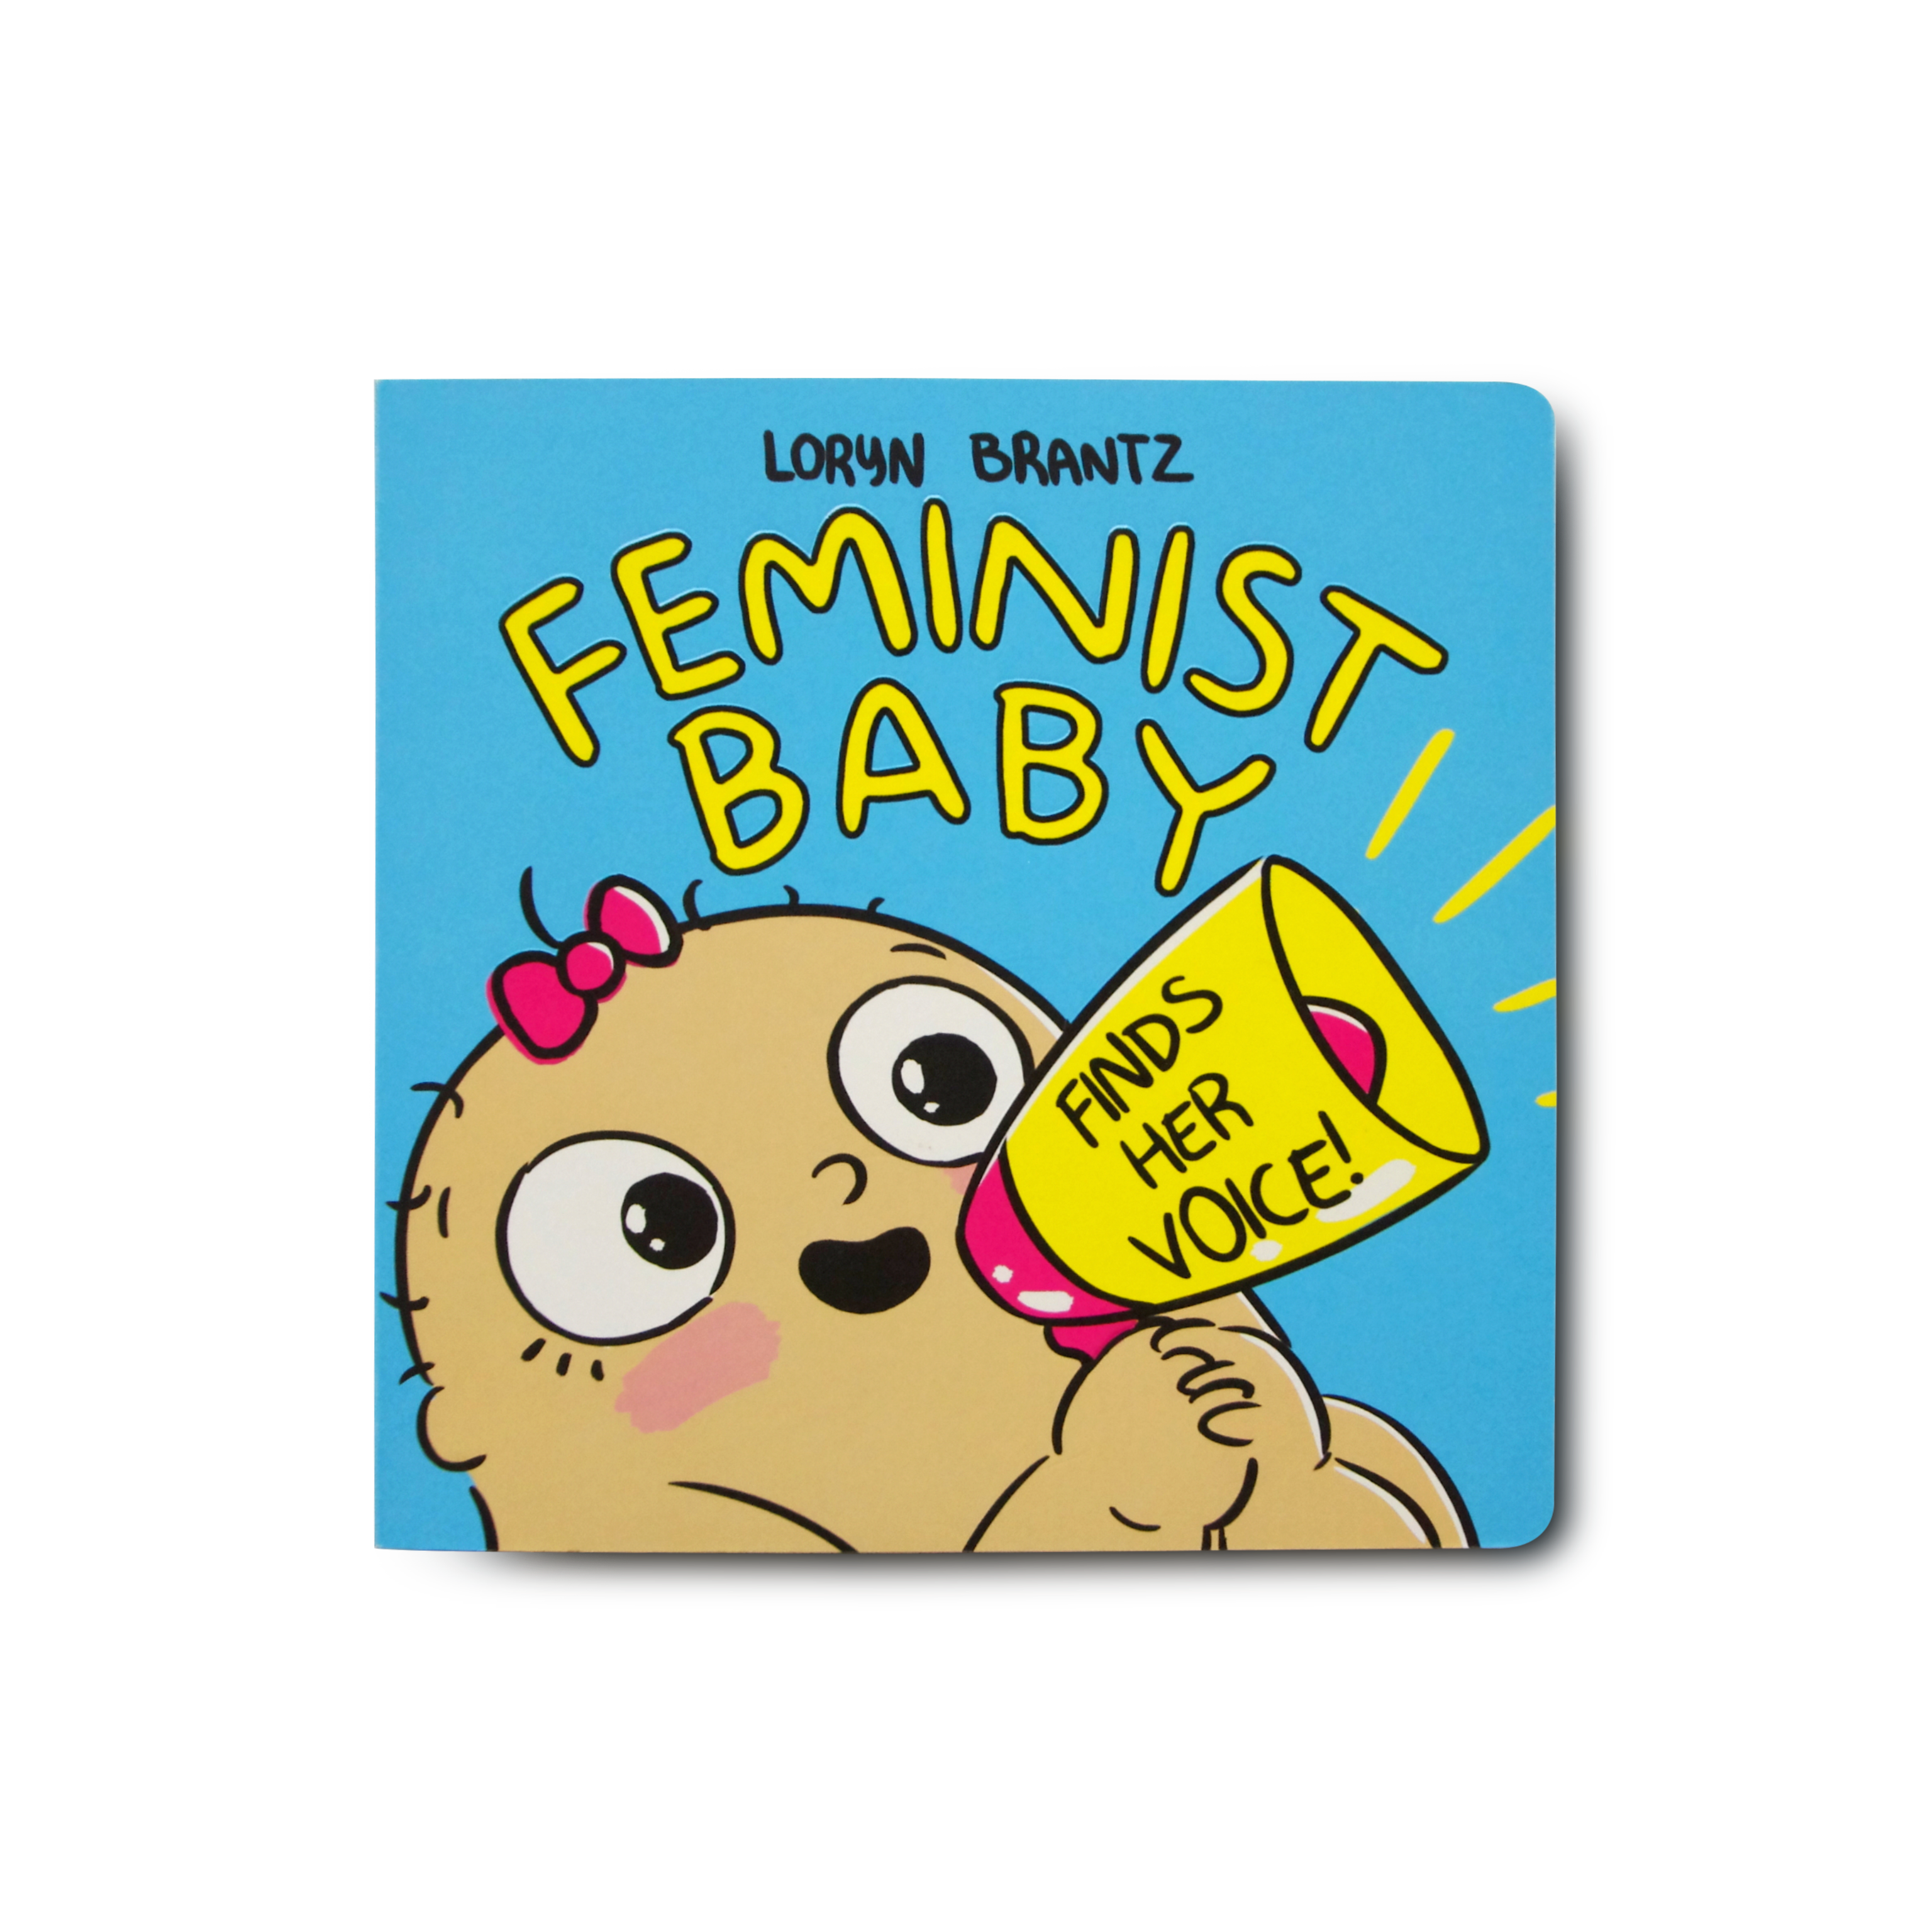 Feminist Baby Finds Her Voice! - Me Books Asia Store